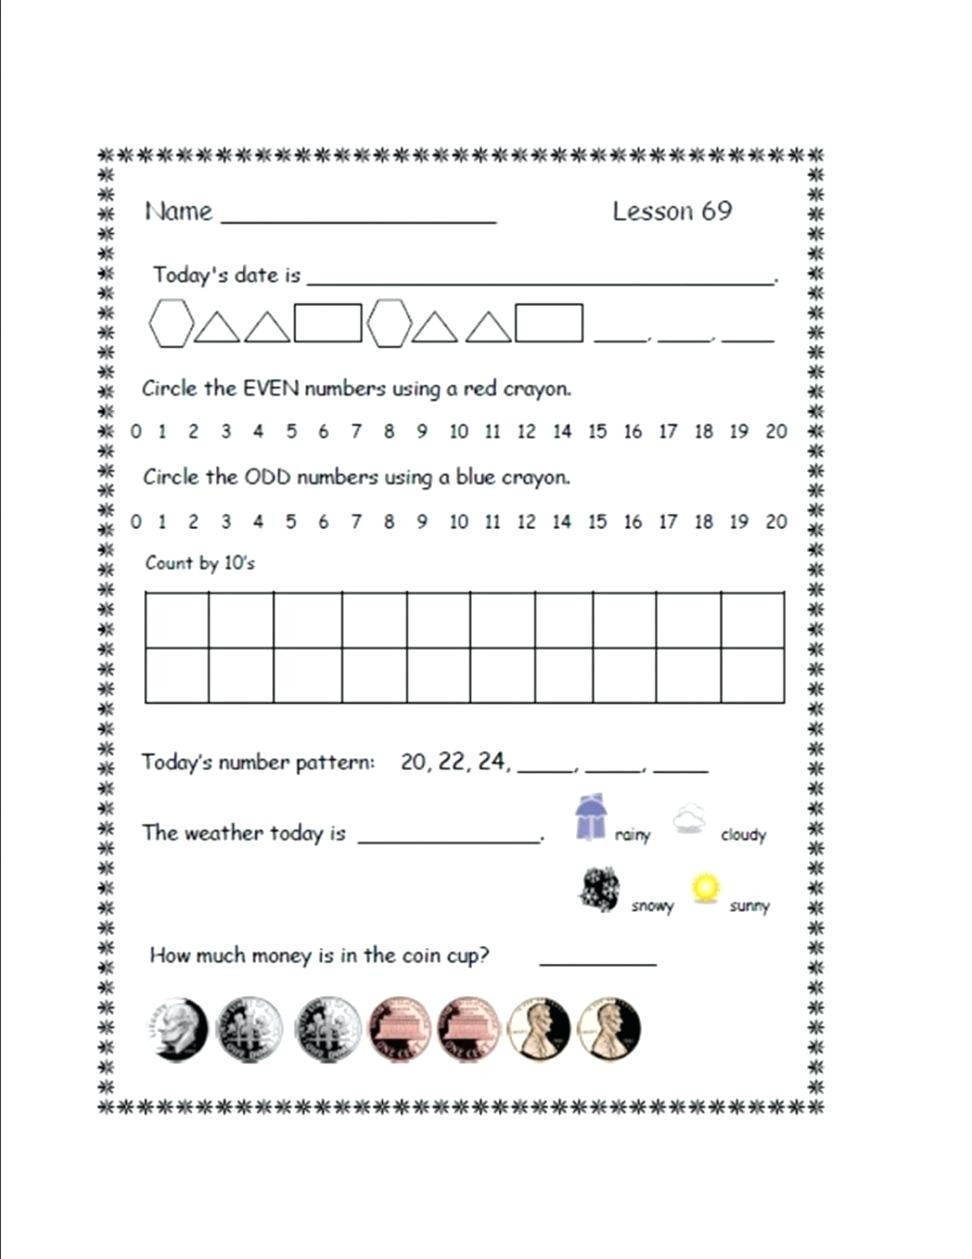 top-10-fun-math-worksheet-for-middle-school-pics-small-letter-worksheet